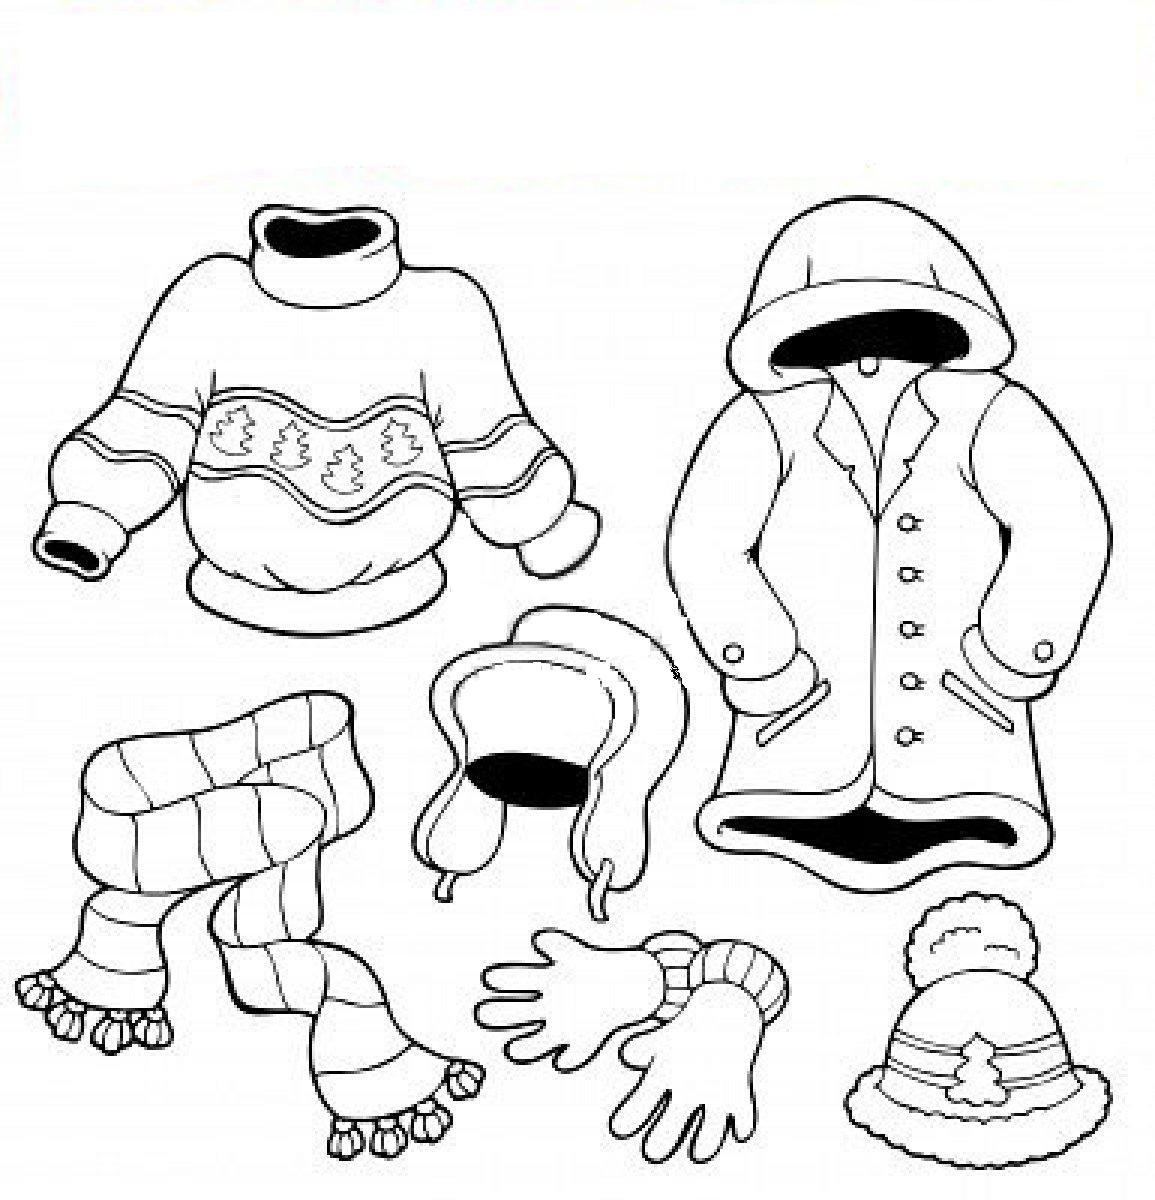 hace frio coloring pages - photo #42